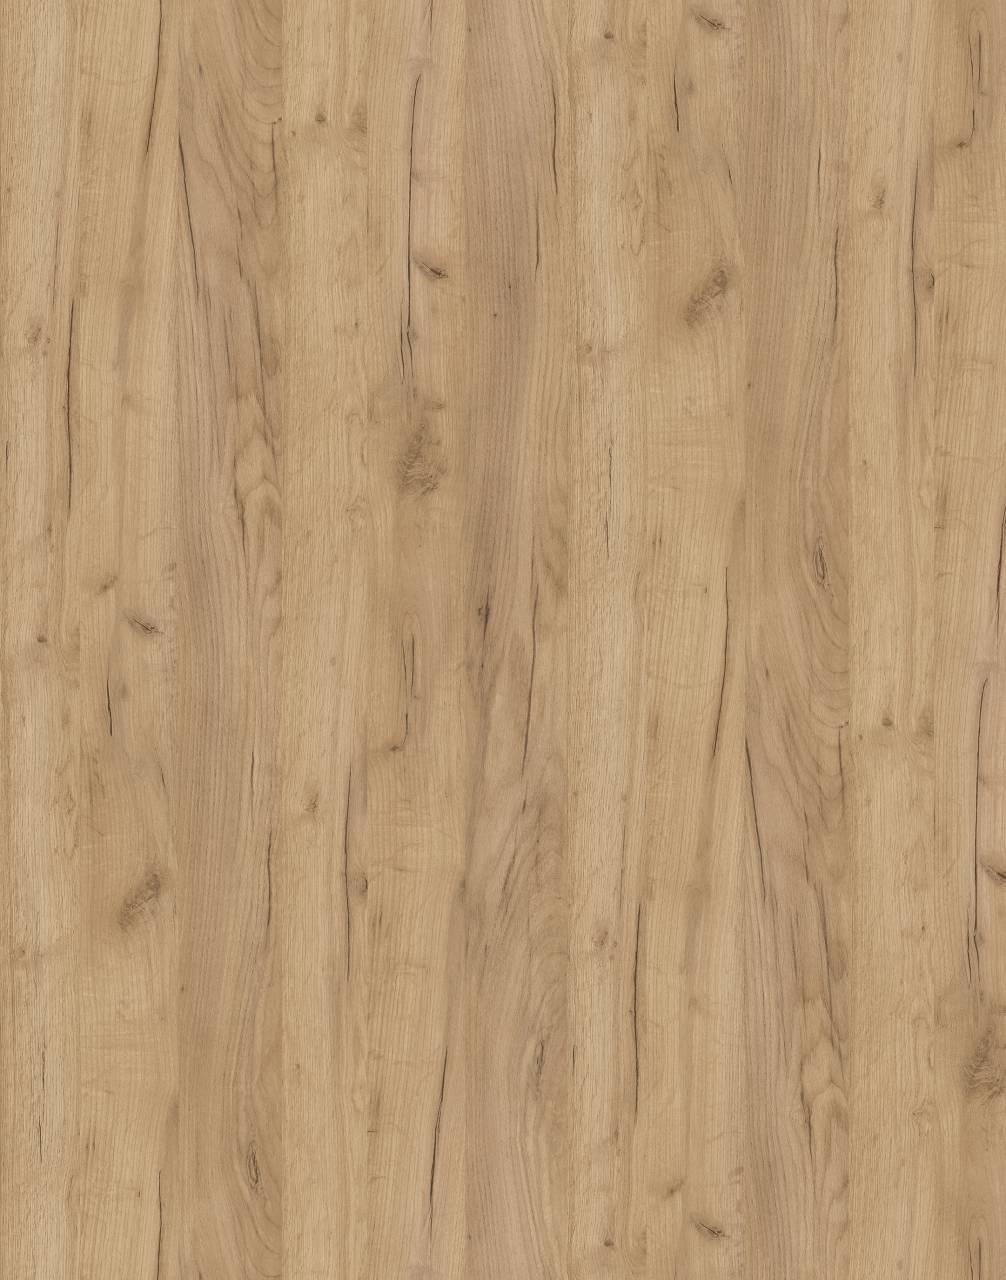 Gold Craft Oak PW HPL with textured surface and golden brown tones for a luxurious and elegant look.